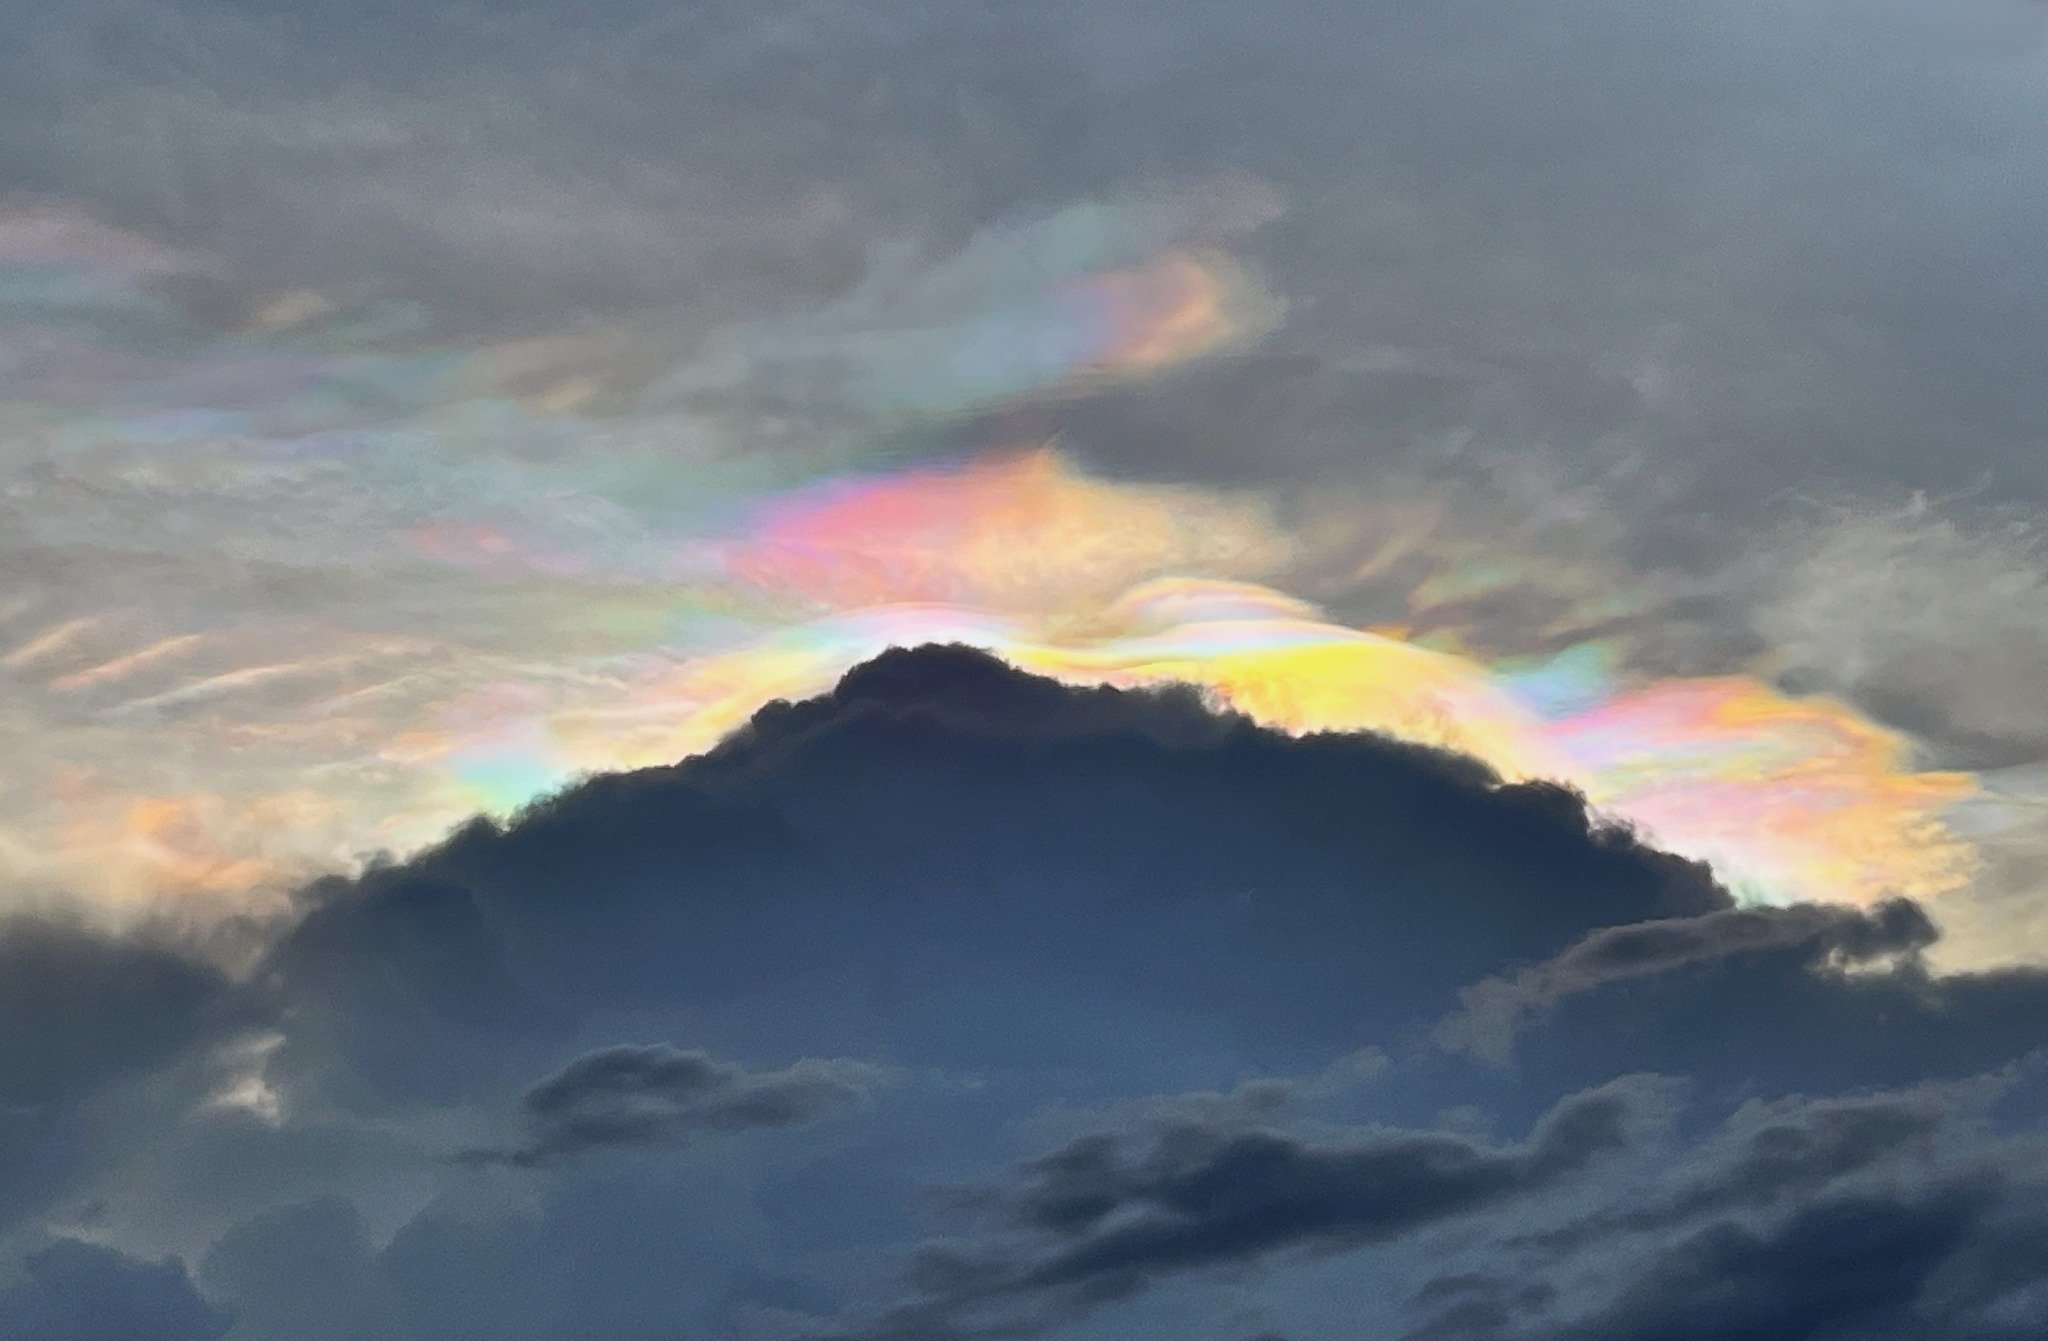 ‘Rainbow clouds’ seen in Tampines on 13 April, iridescence dubbed as S’pore’s Northern Lights